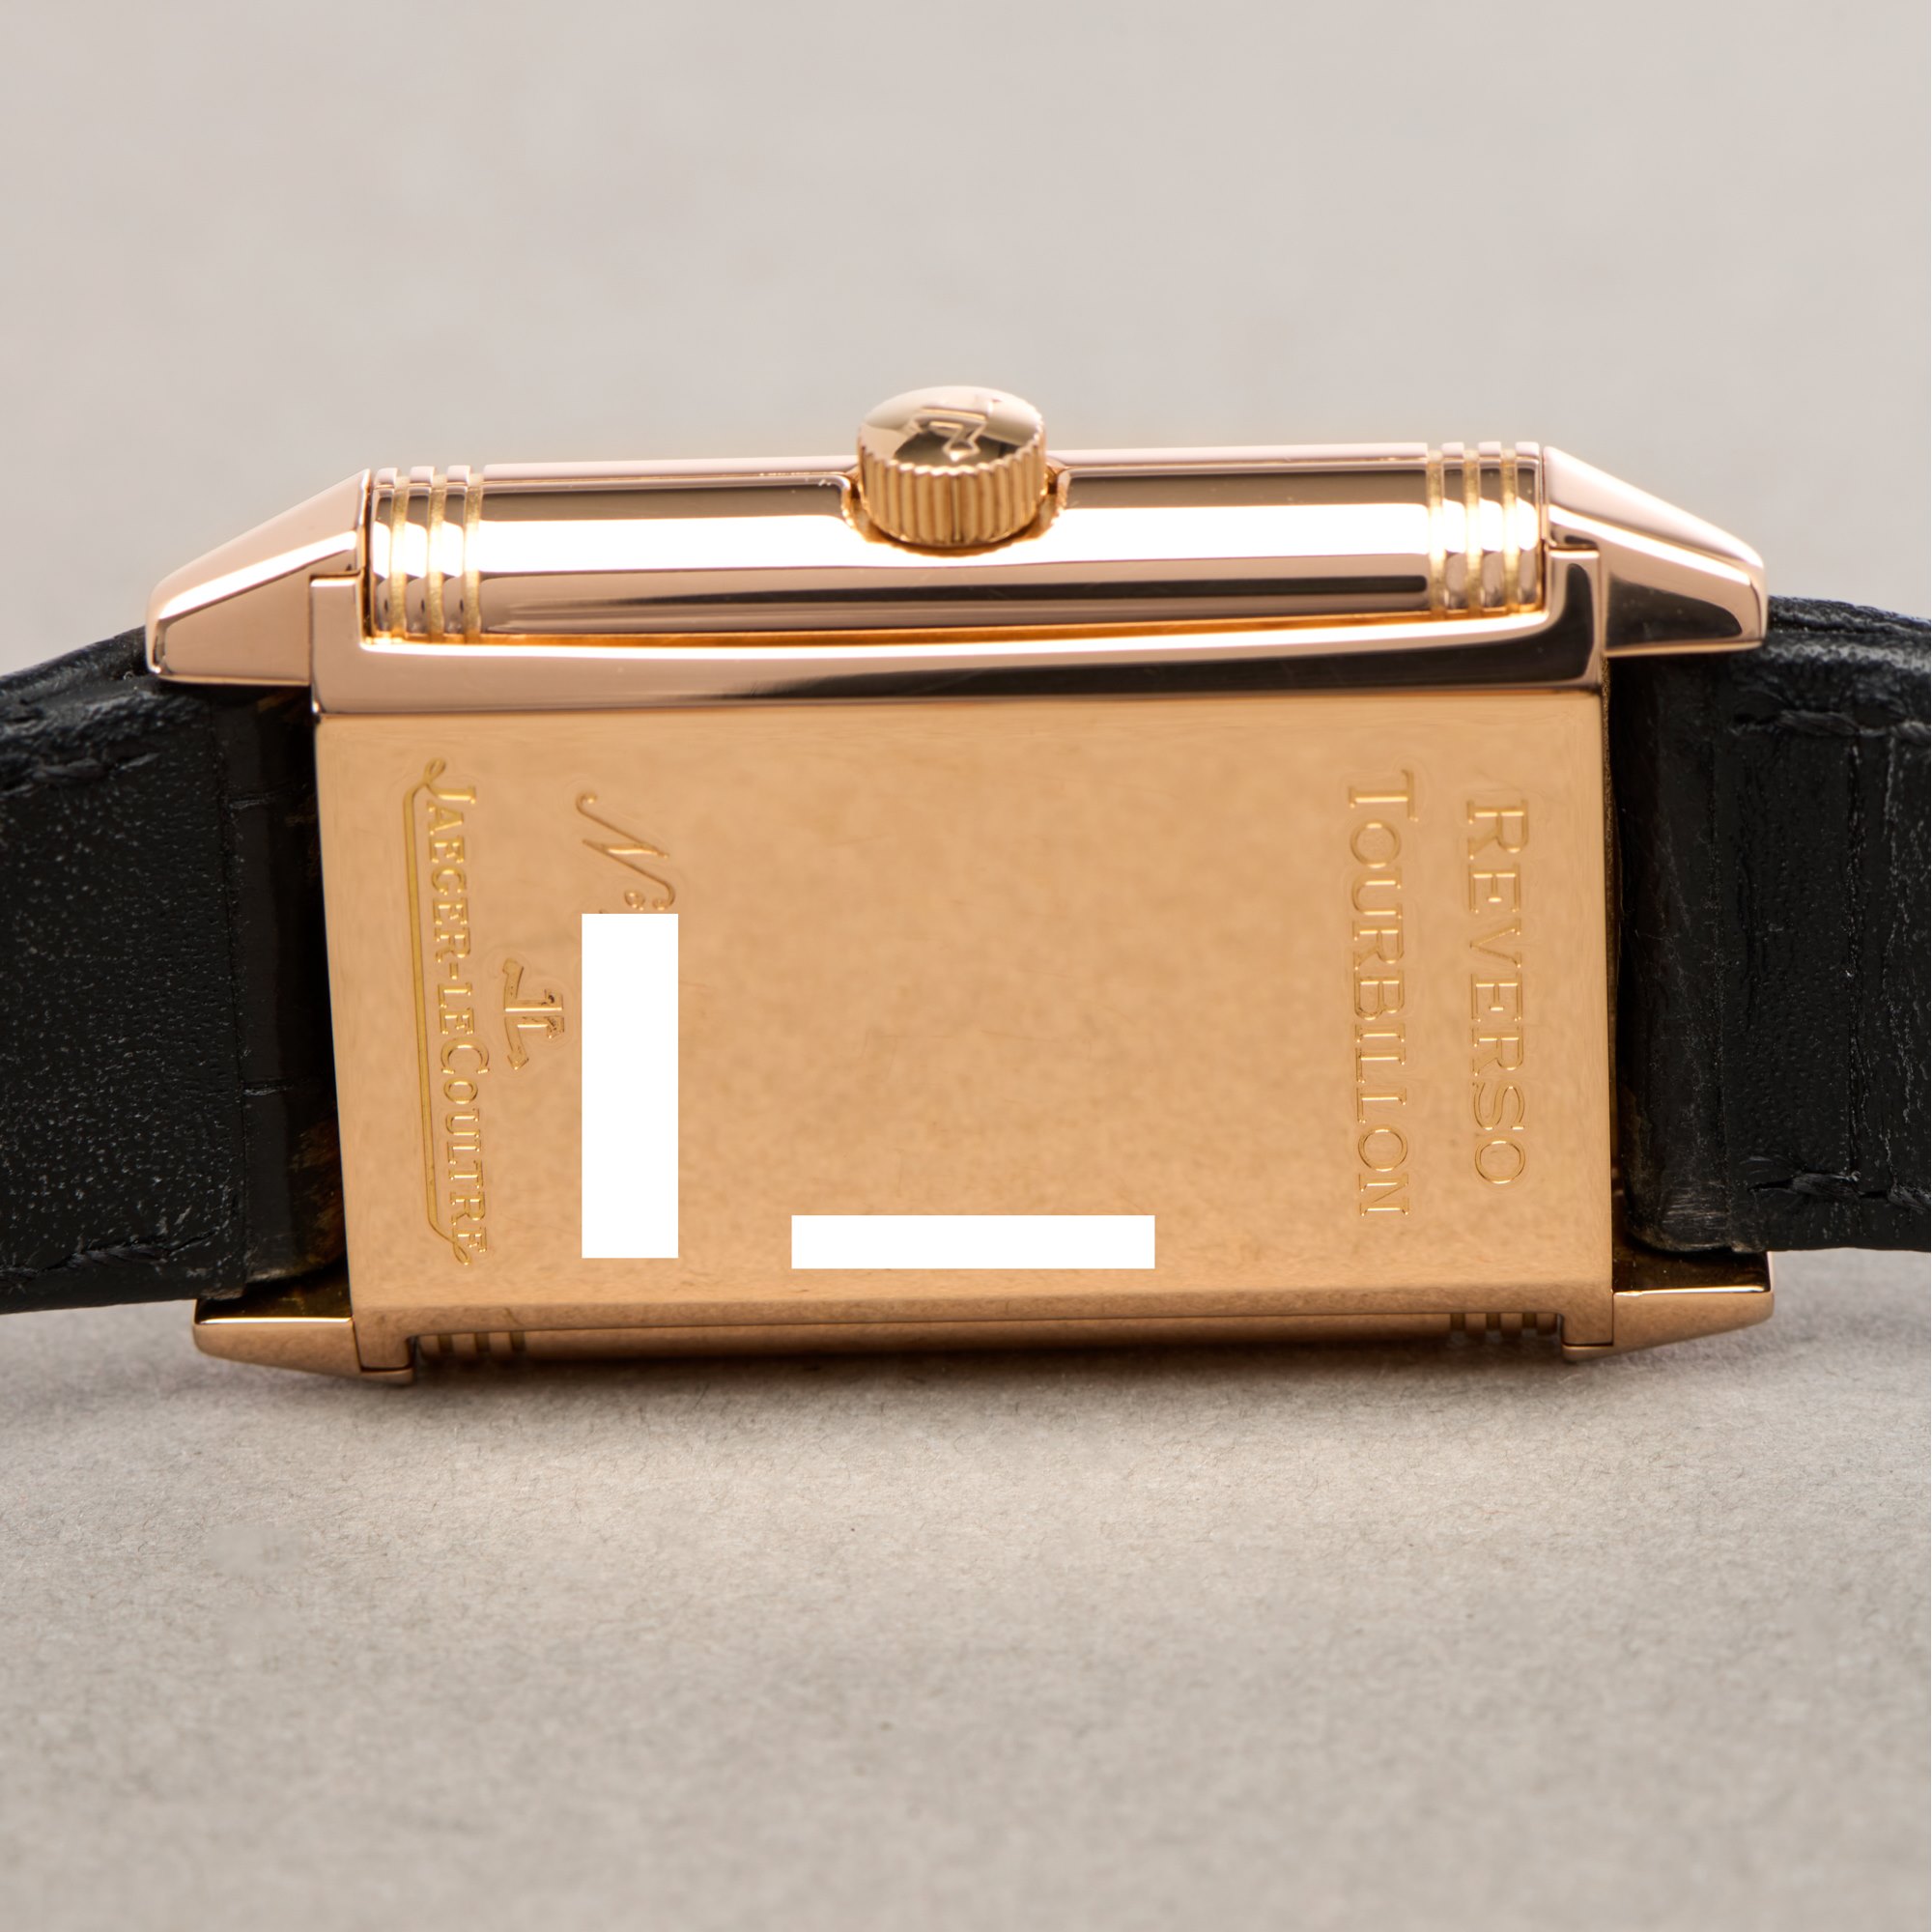 Jaeger-LeCoultre Reverso Classic Tourbillon Limited Edition of 500 18K Rose Gold 270.2.68